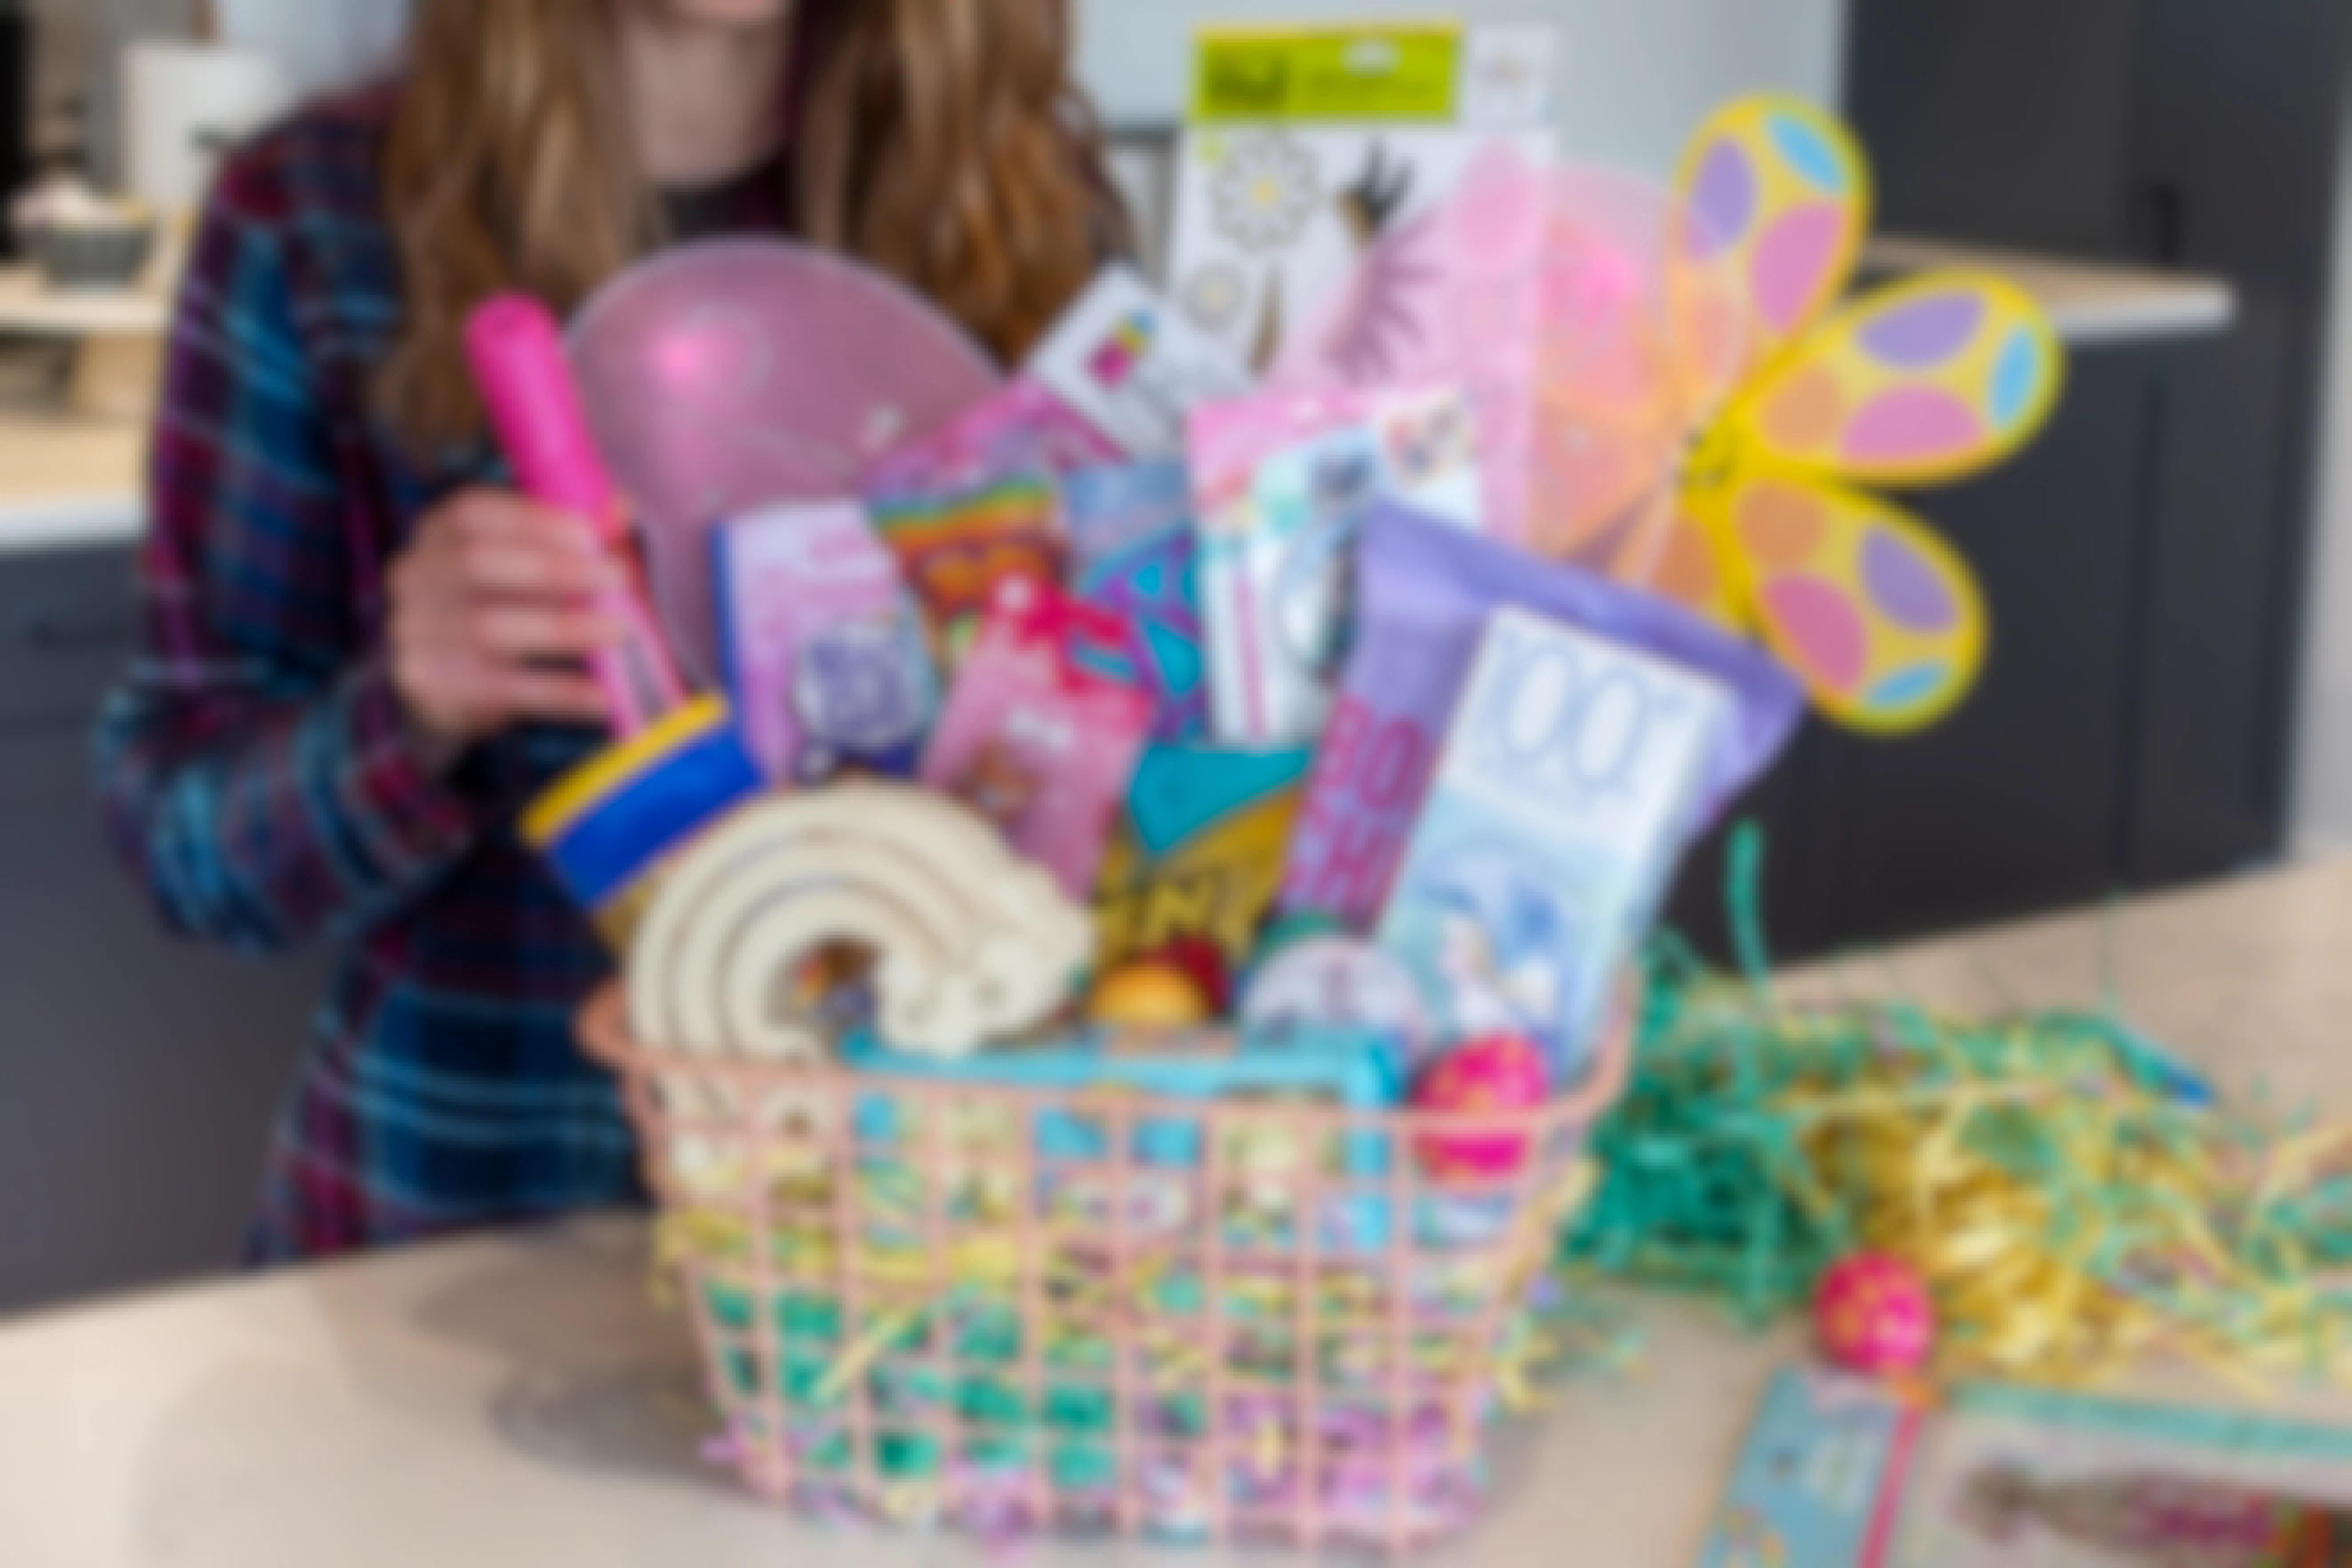 A woman stands behind the counter arranging items inside a large pink Easter basket.